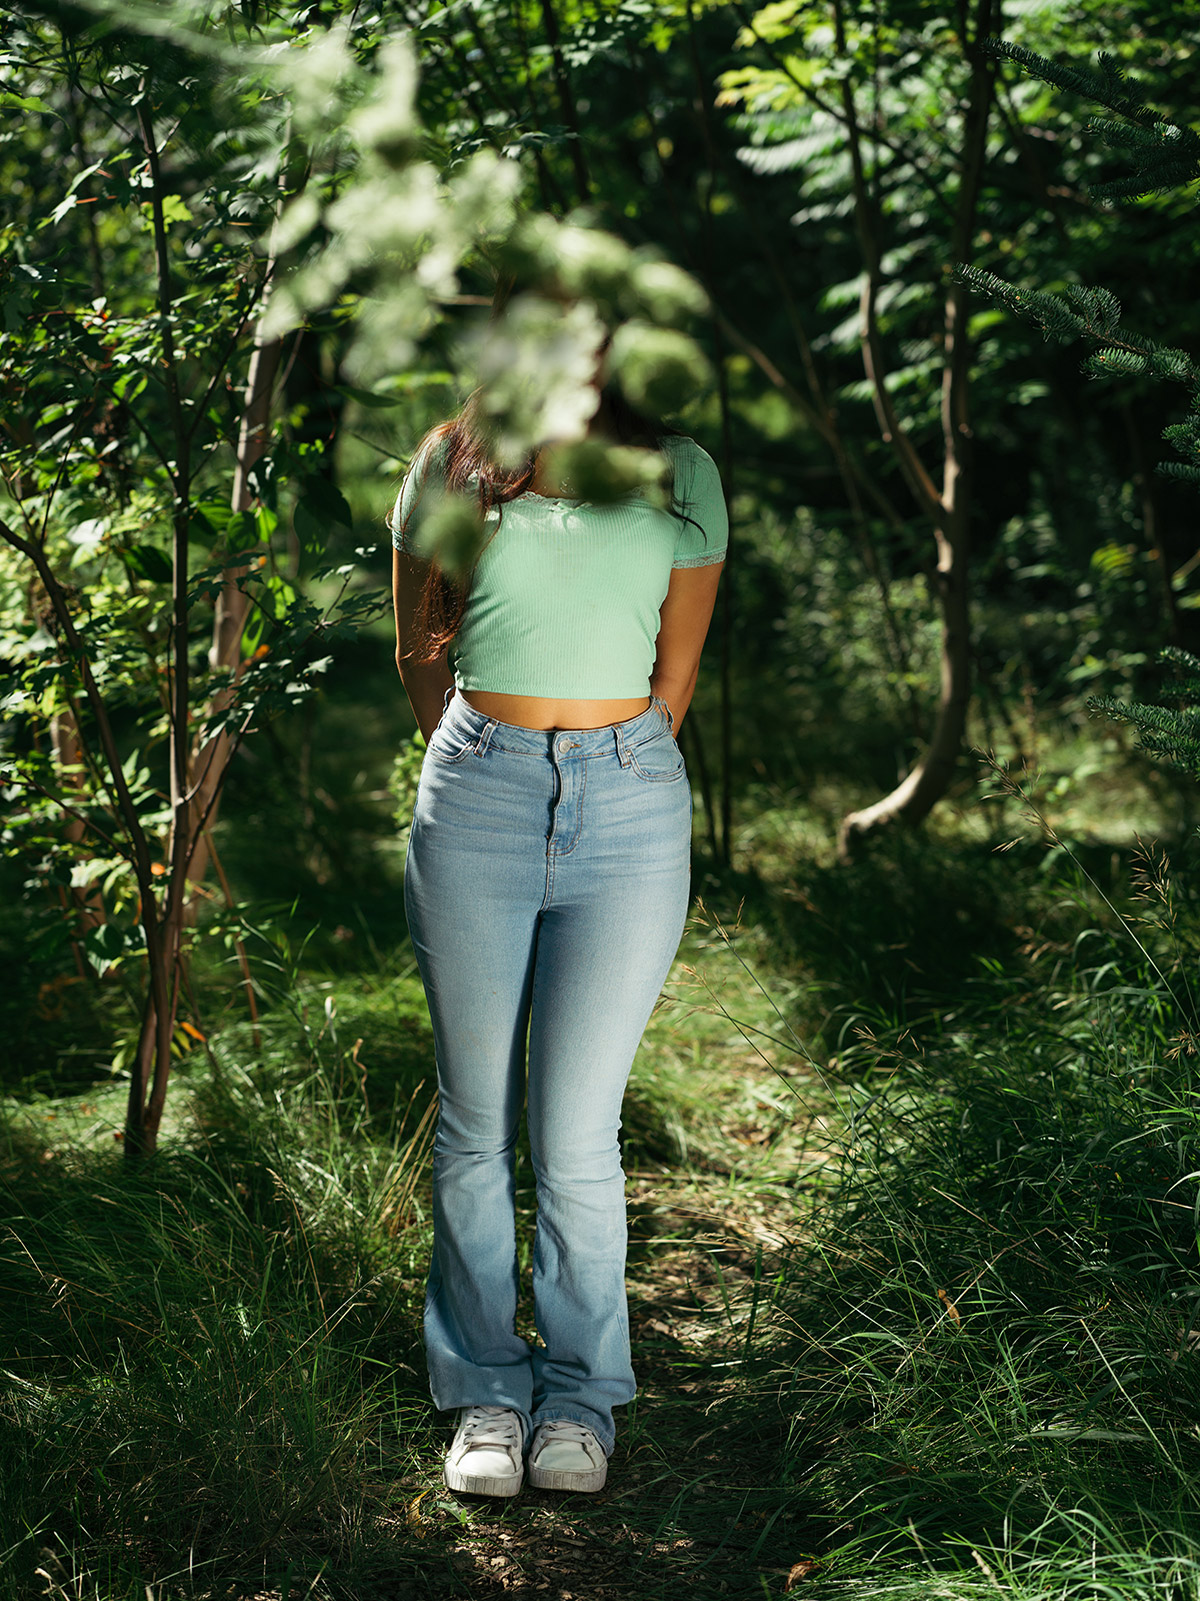 Photo of a teenage girl wearing a green t-shirt and light-wash jeans. She is standing in a forest and a tree branch hangs down from the edge of the frame, blocking her face from view.